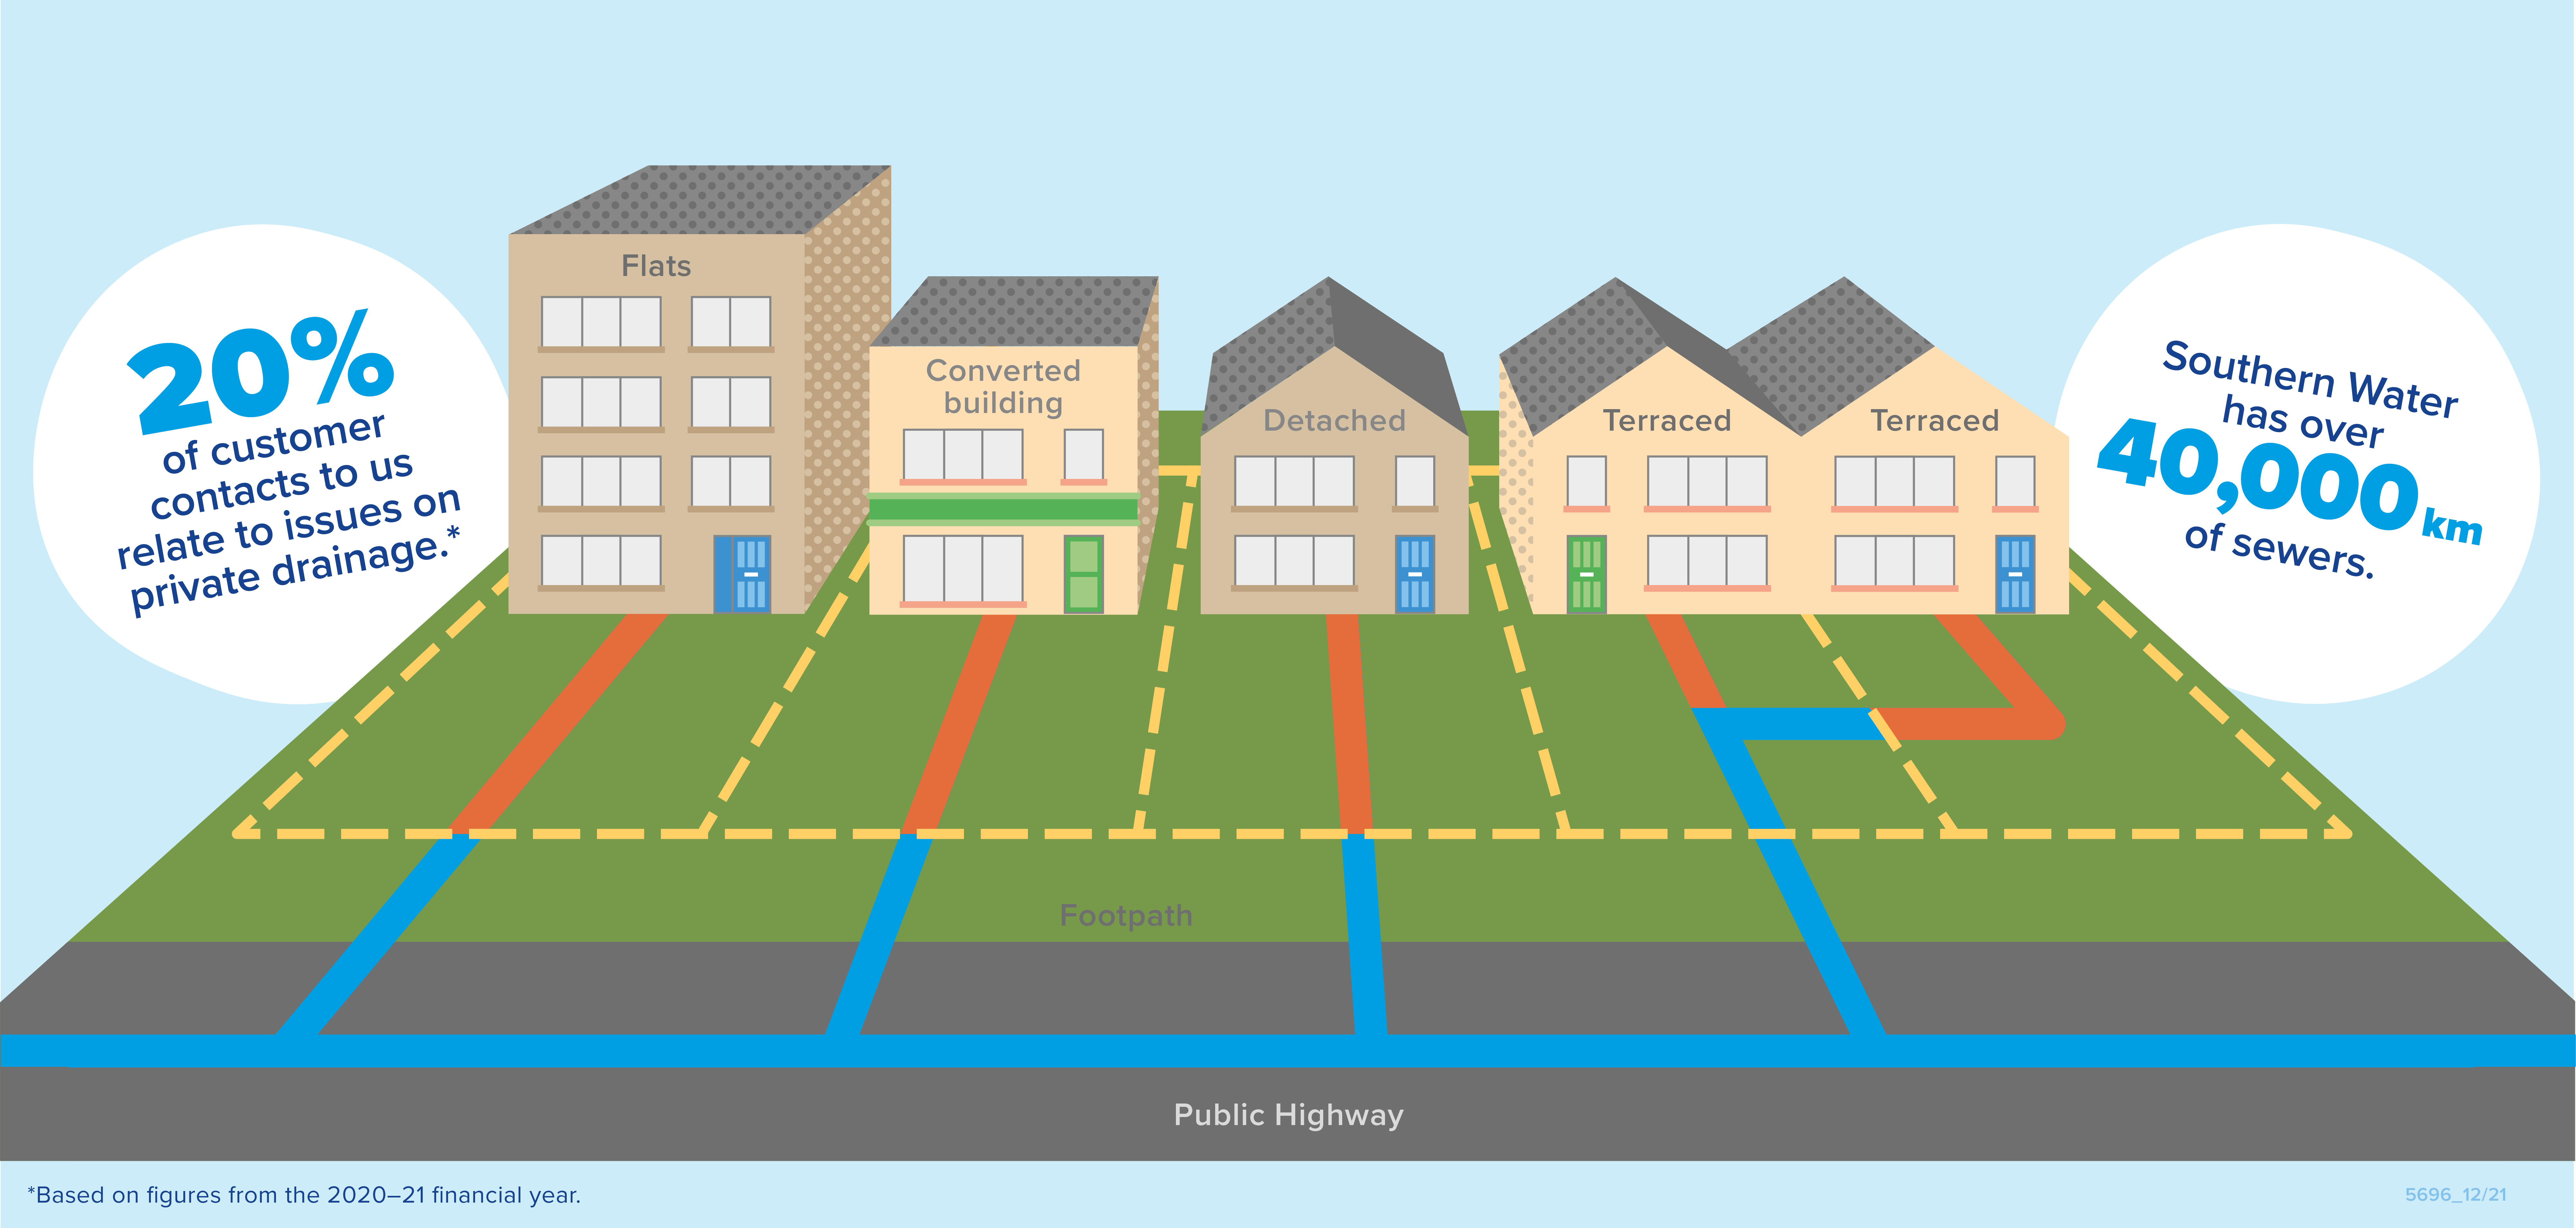 An info-graphic displaying drainage pipes on properties